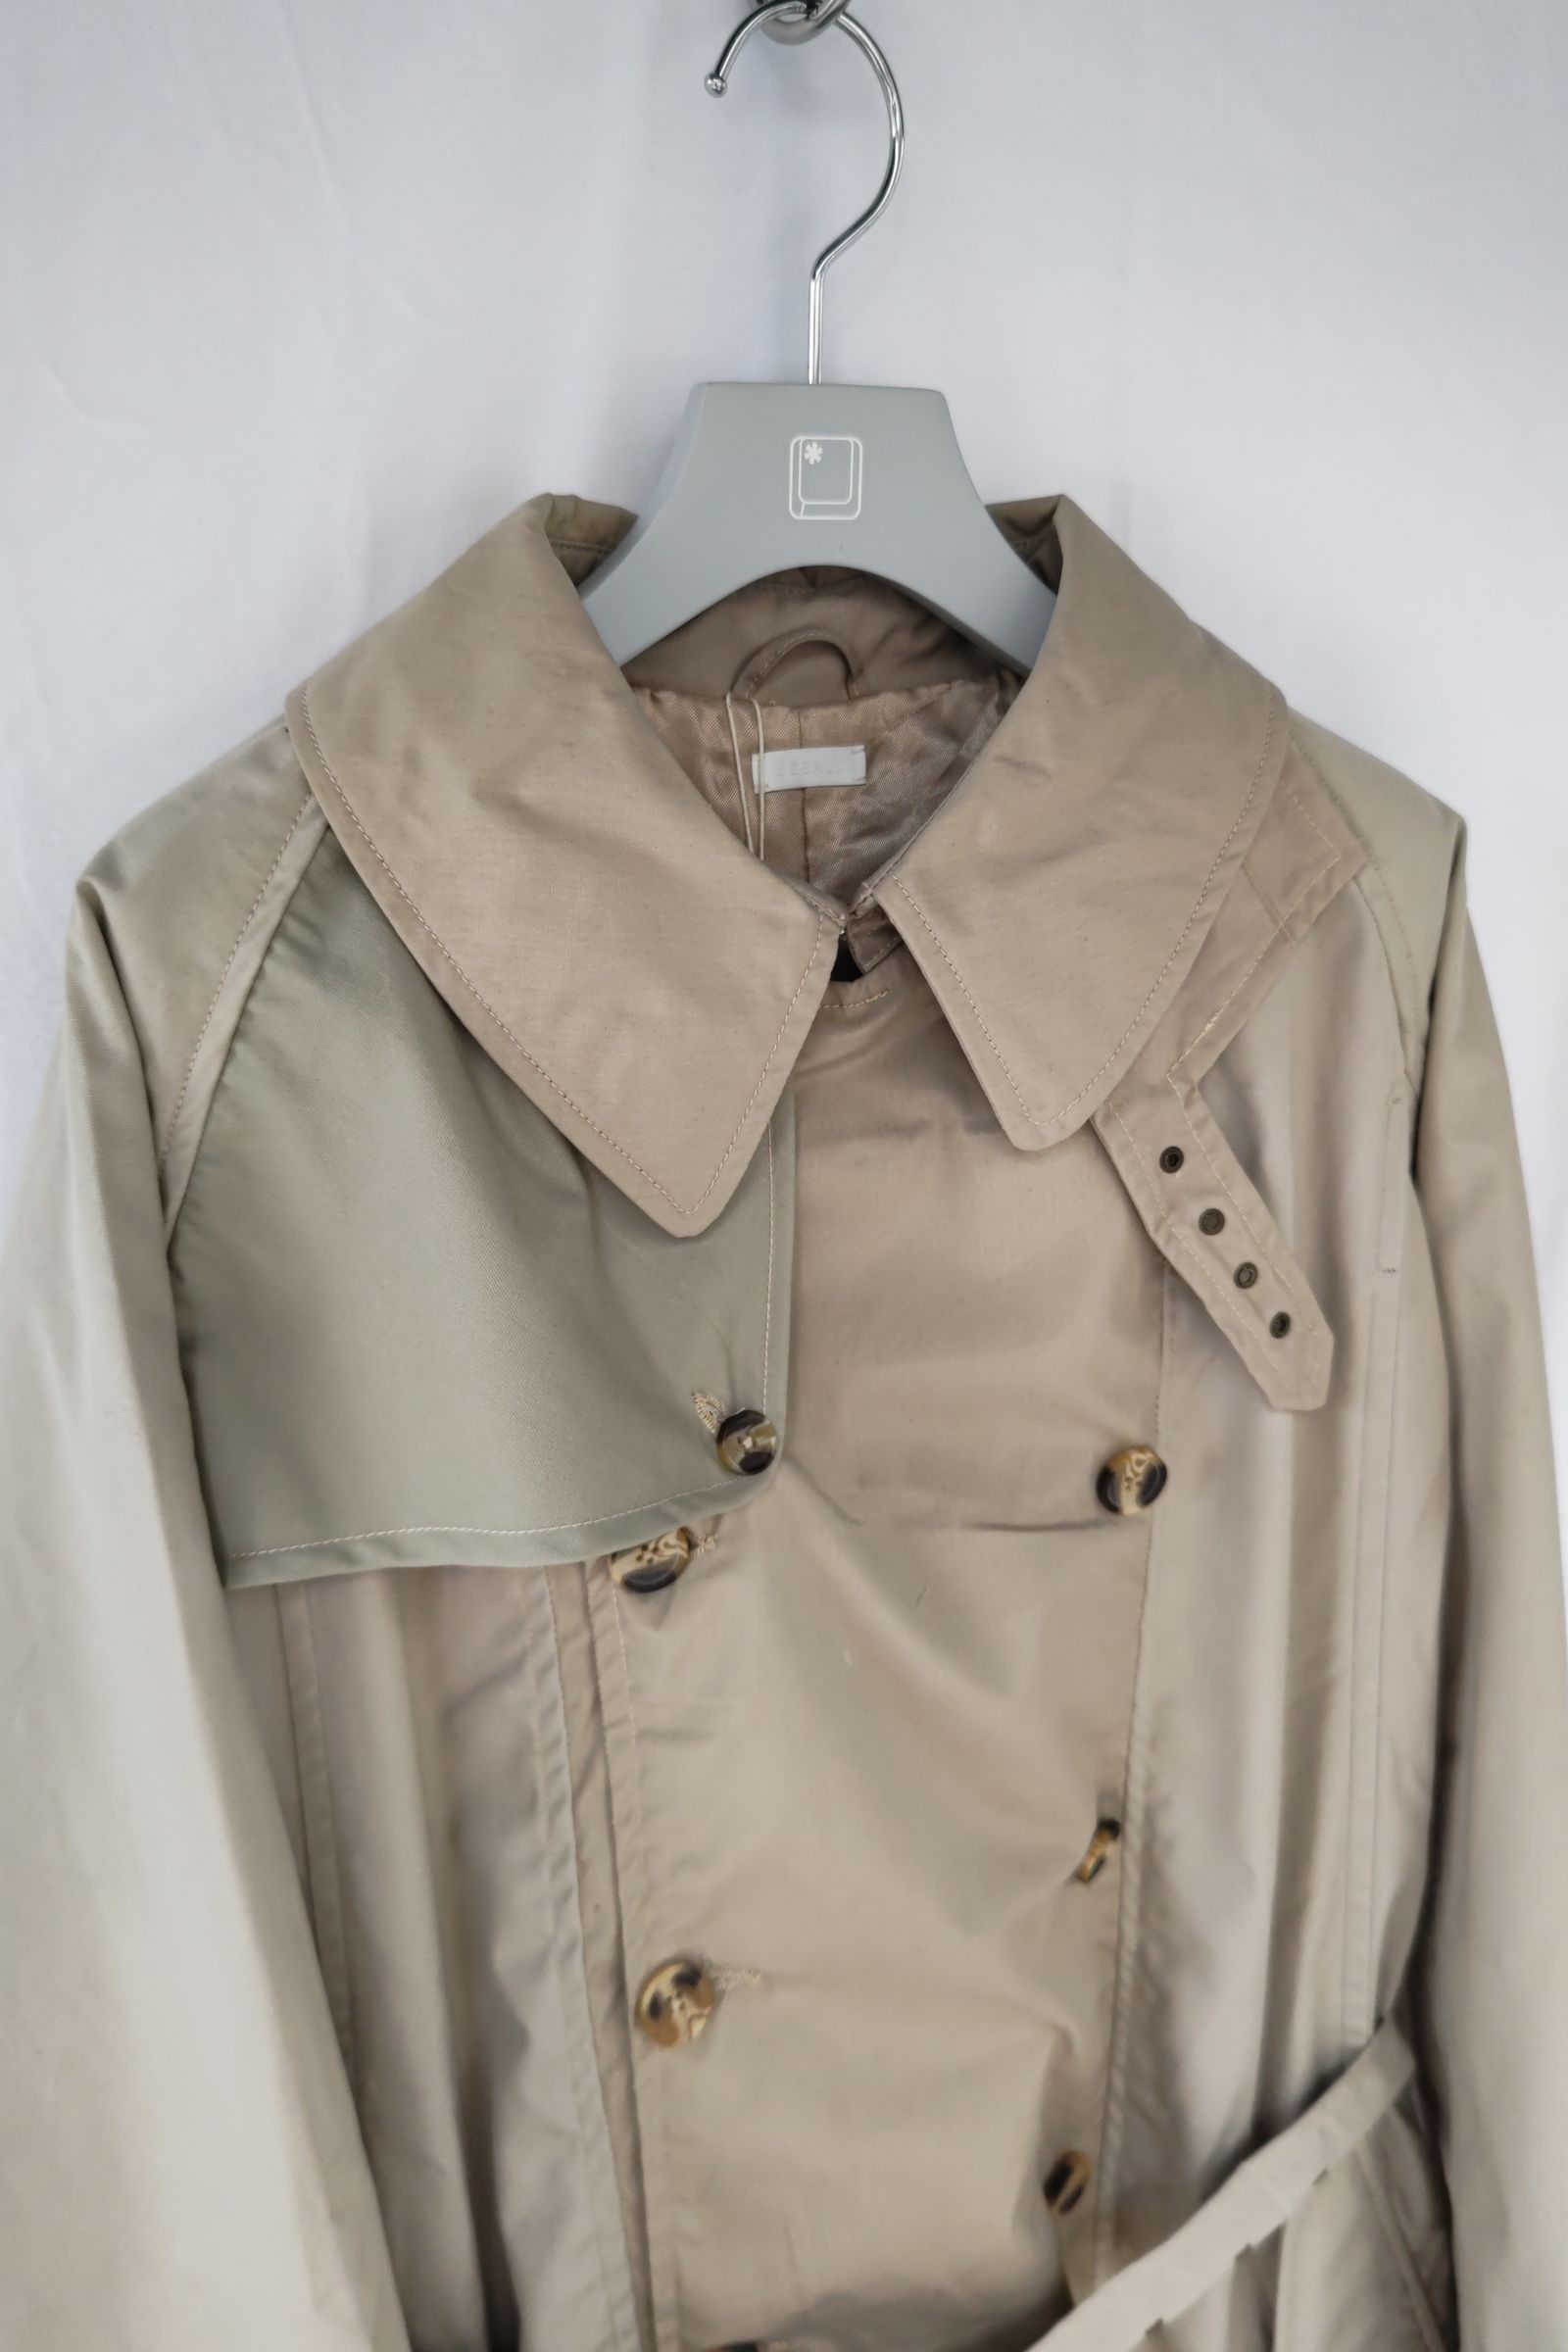 SEEALL - reconstructed trench coat-beige mix-22aw | asterisk